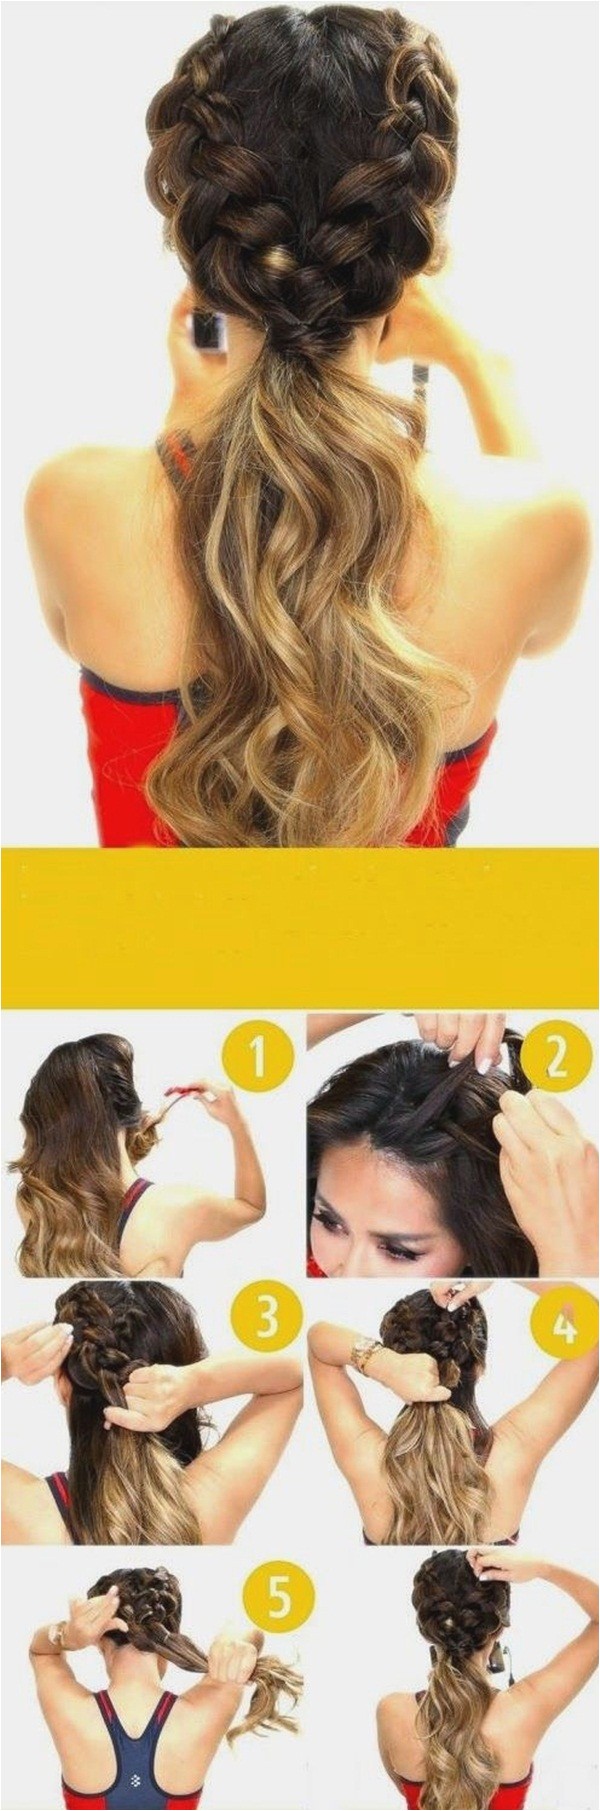 easy hairstyles schools try 2016